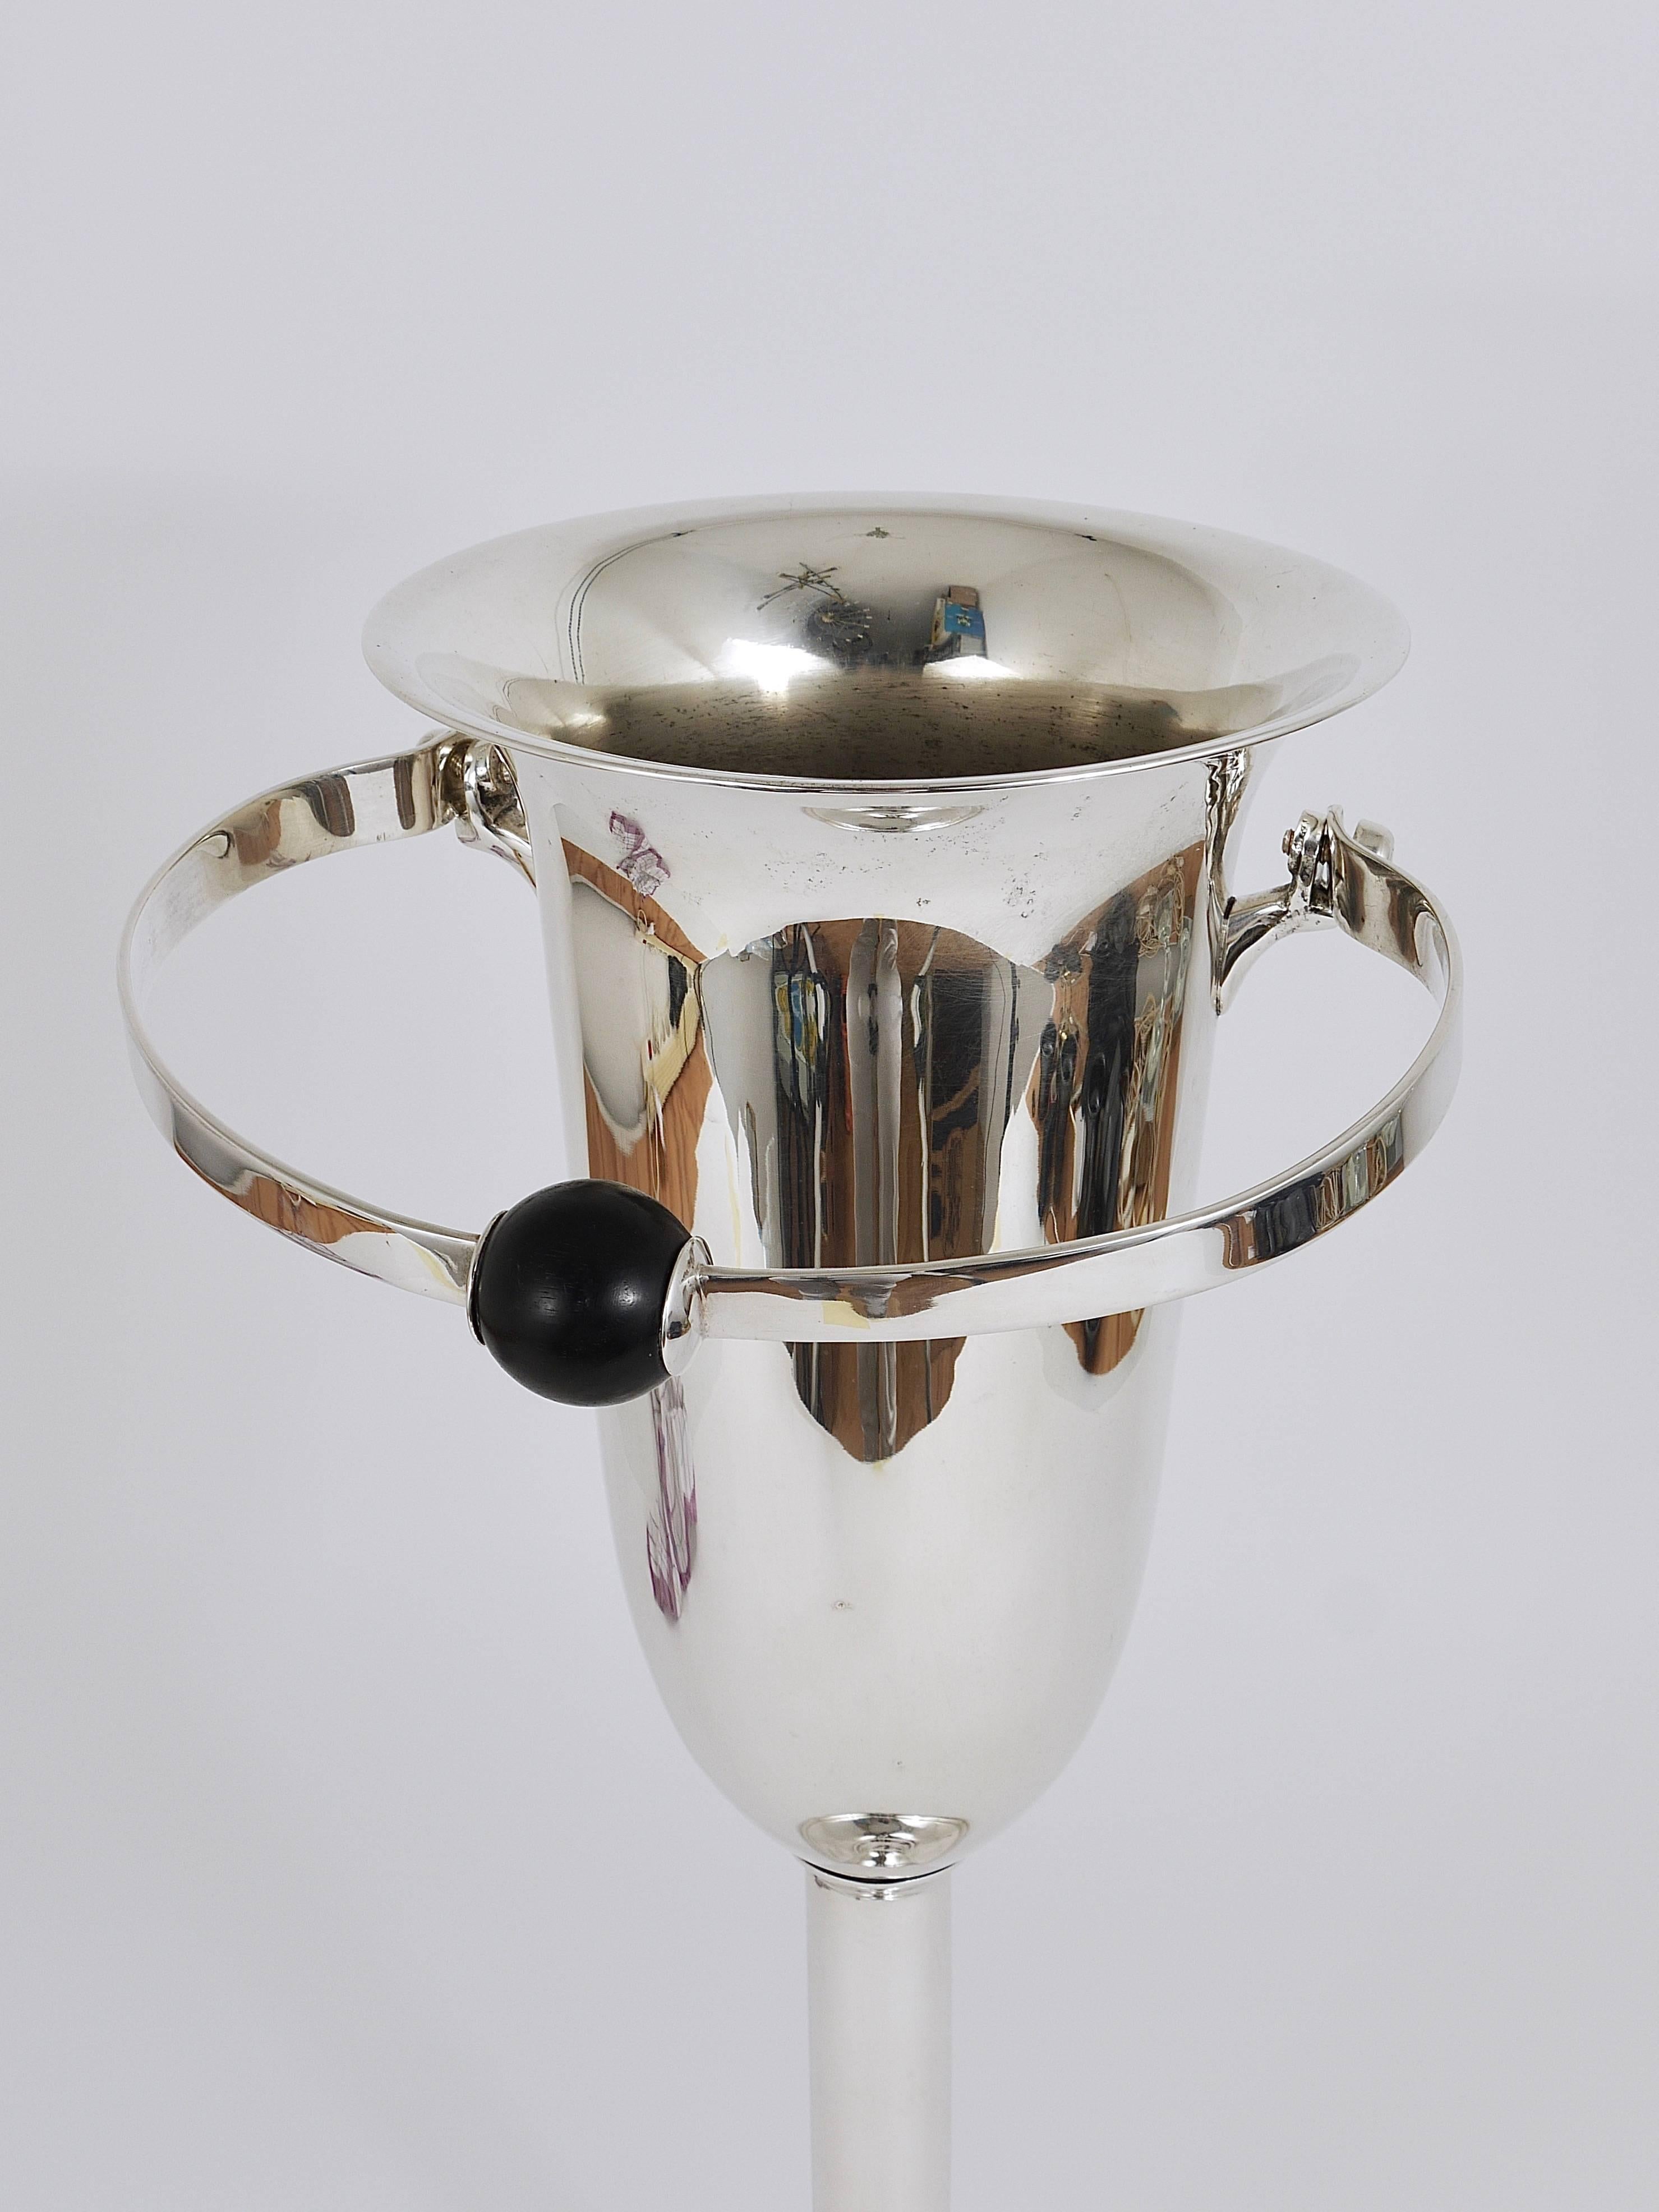 A beautiful floor-standing Art Deco wine or champagne cooler or ice bucket from the 1930s. Made in France. Silver-plated, with a round handle with a nice wooden mahogany ball. in very good condition with marginal patina in the silver-plating. 